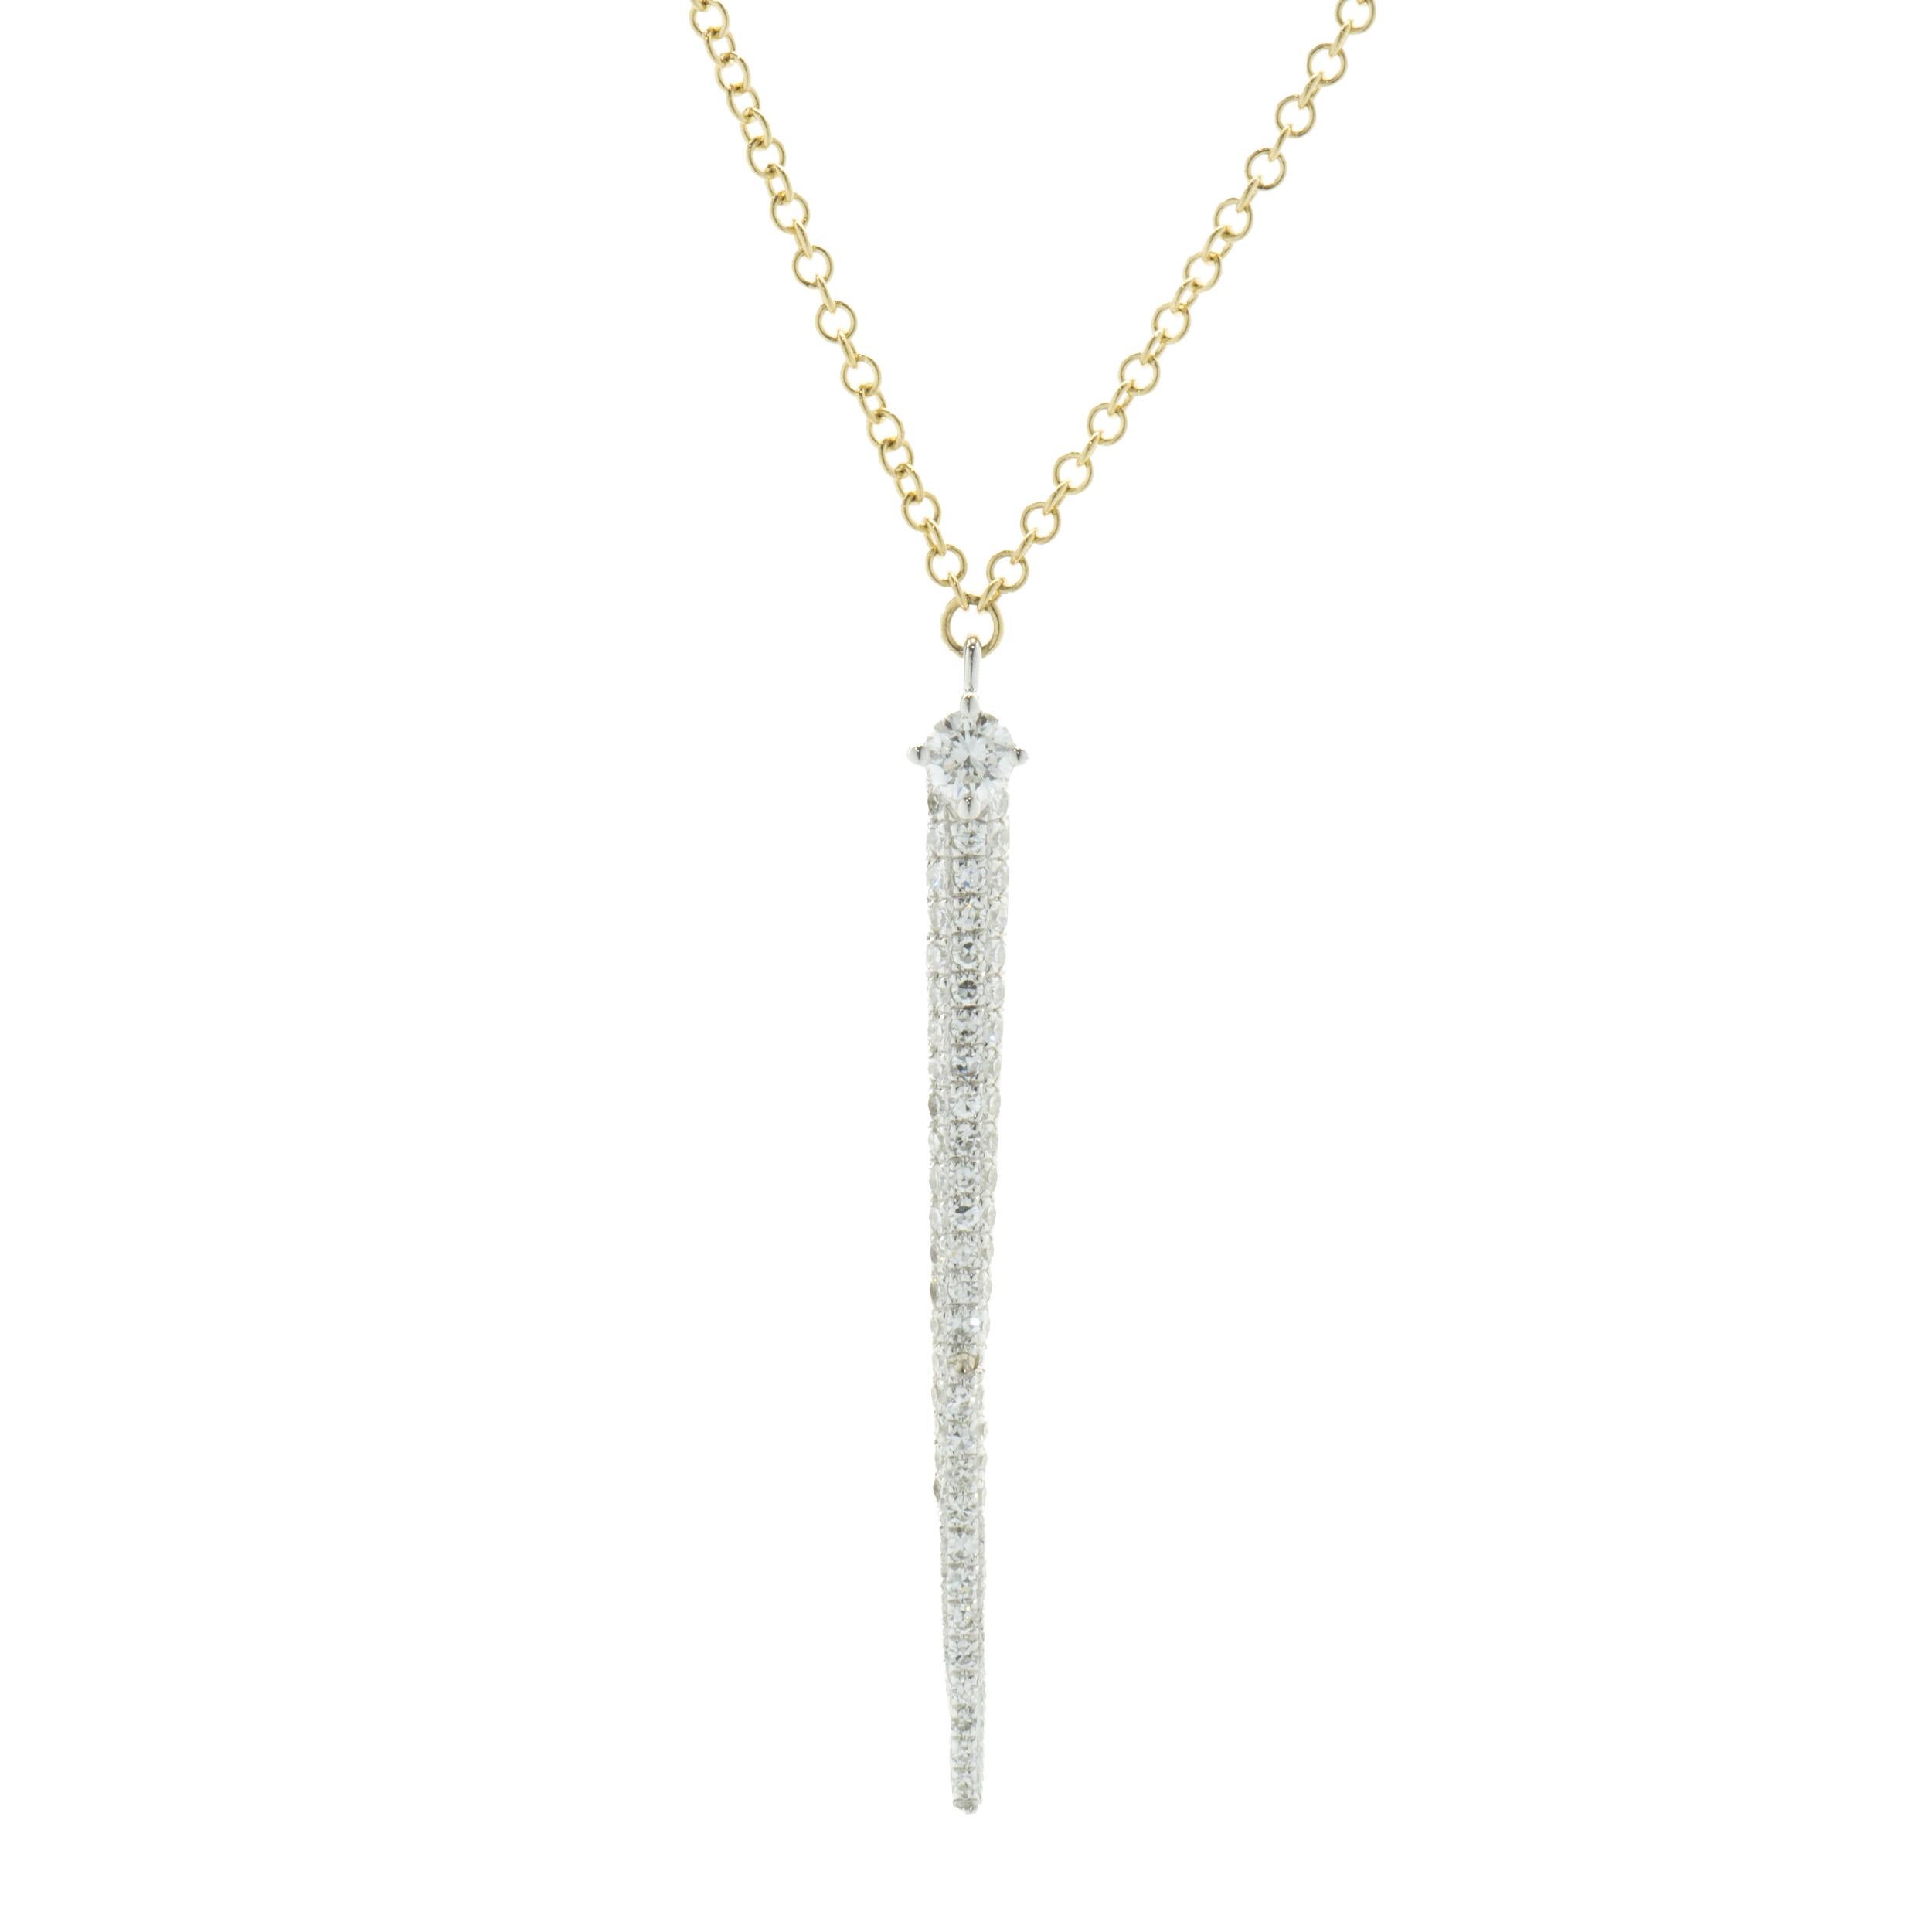 Designer: custom
Material: 14K yellow gold
Diamonds: 68 round brilliant cut = 0.26cttw
Color: G
Clarity: VS1-2
Weight: 1.76 grams
Dimensions: necklace measures 16-inches long